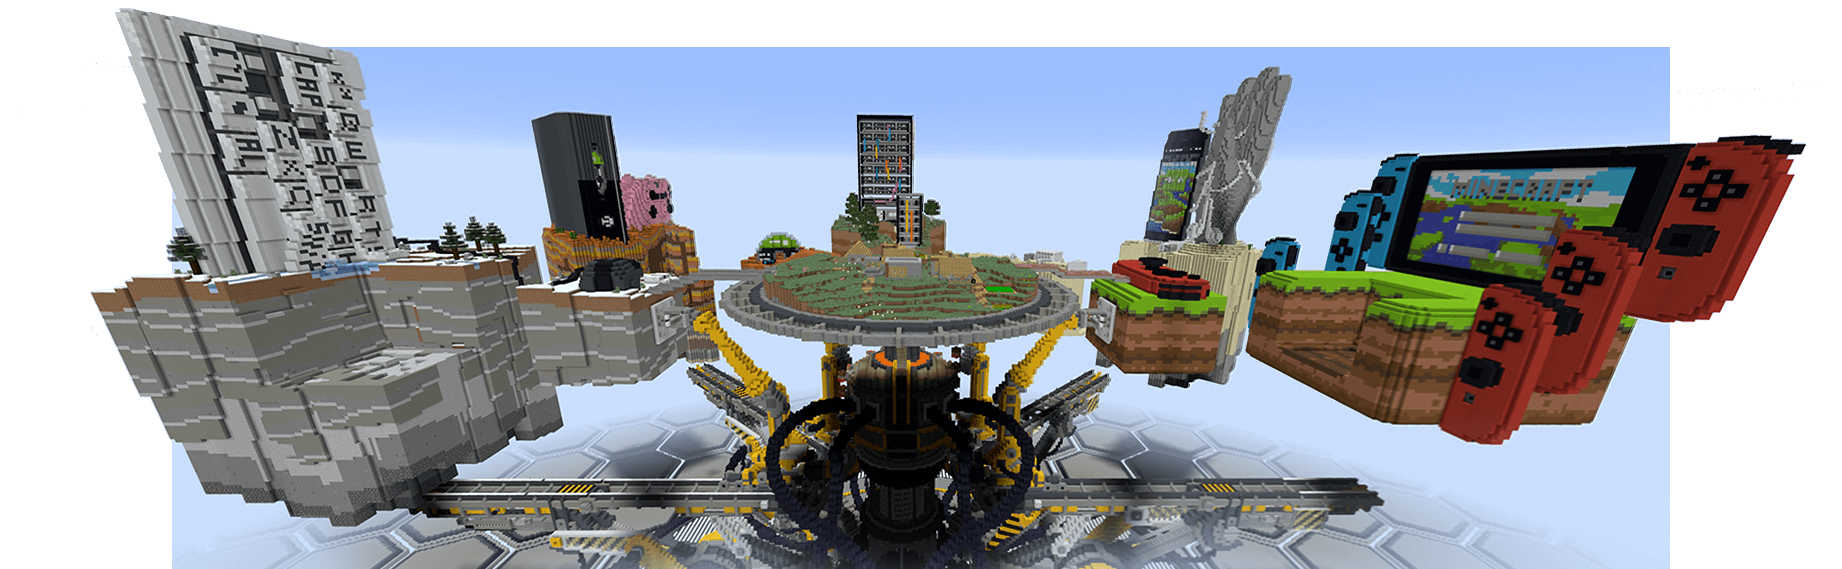 Minecraft togetherness machine, representing platforms where Minecraft is playable: PC, Xbox, mobile, and Nintendo Switch.